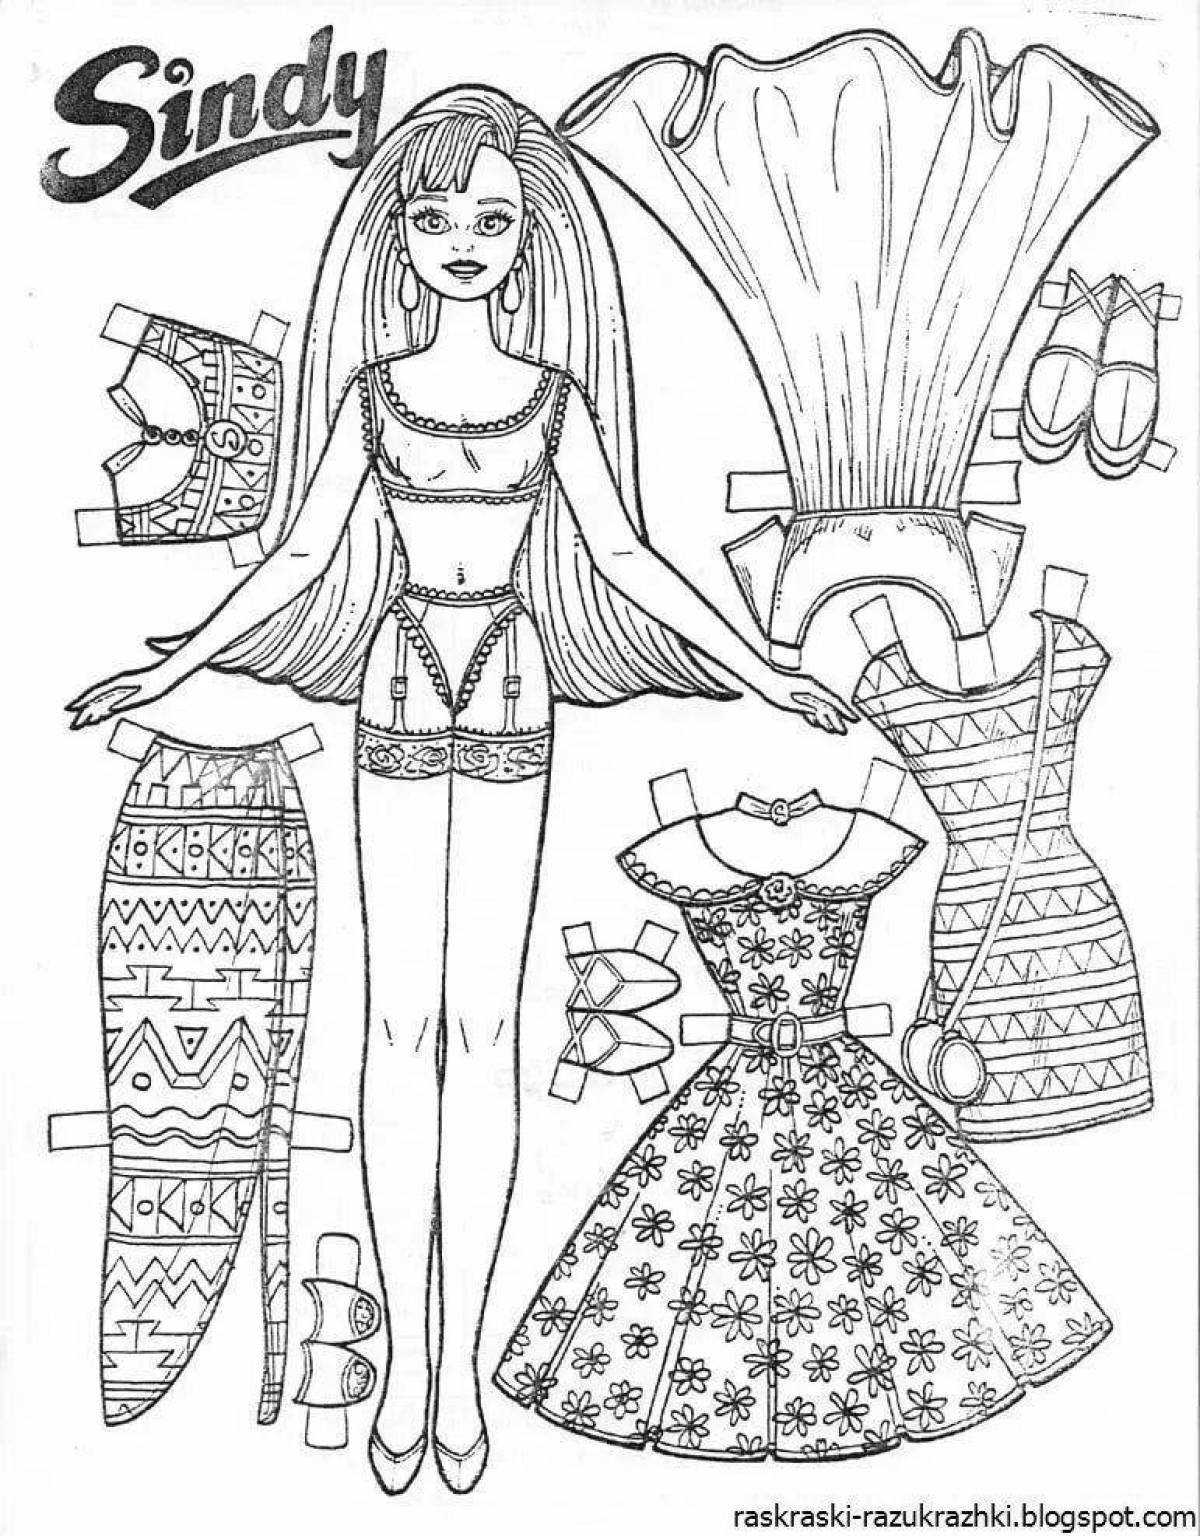 Fun paper doll with clothes to cut out